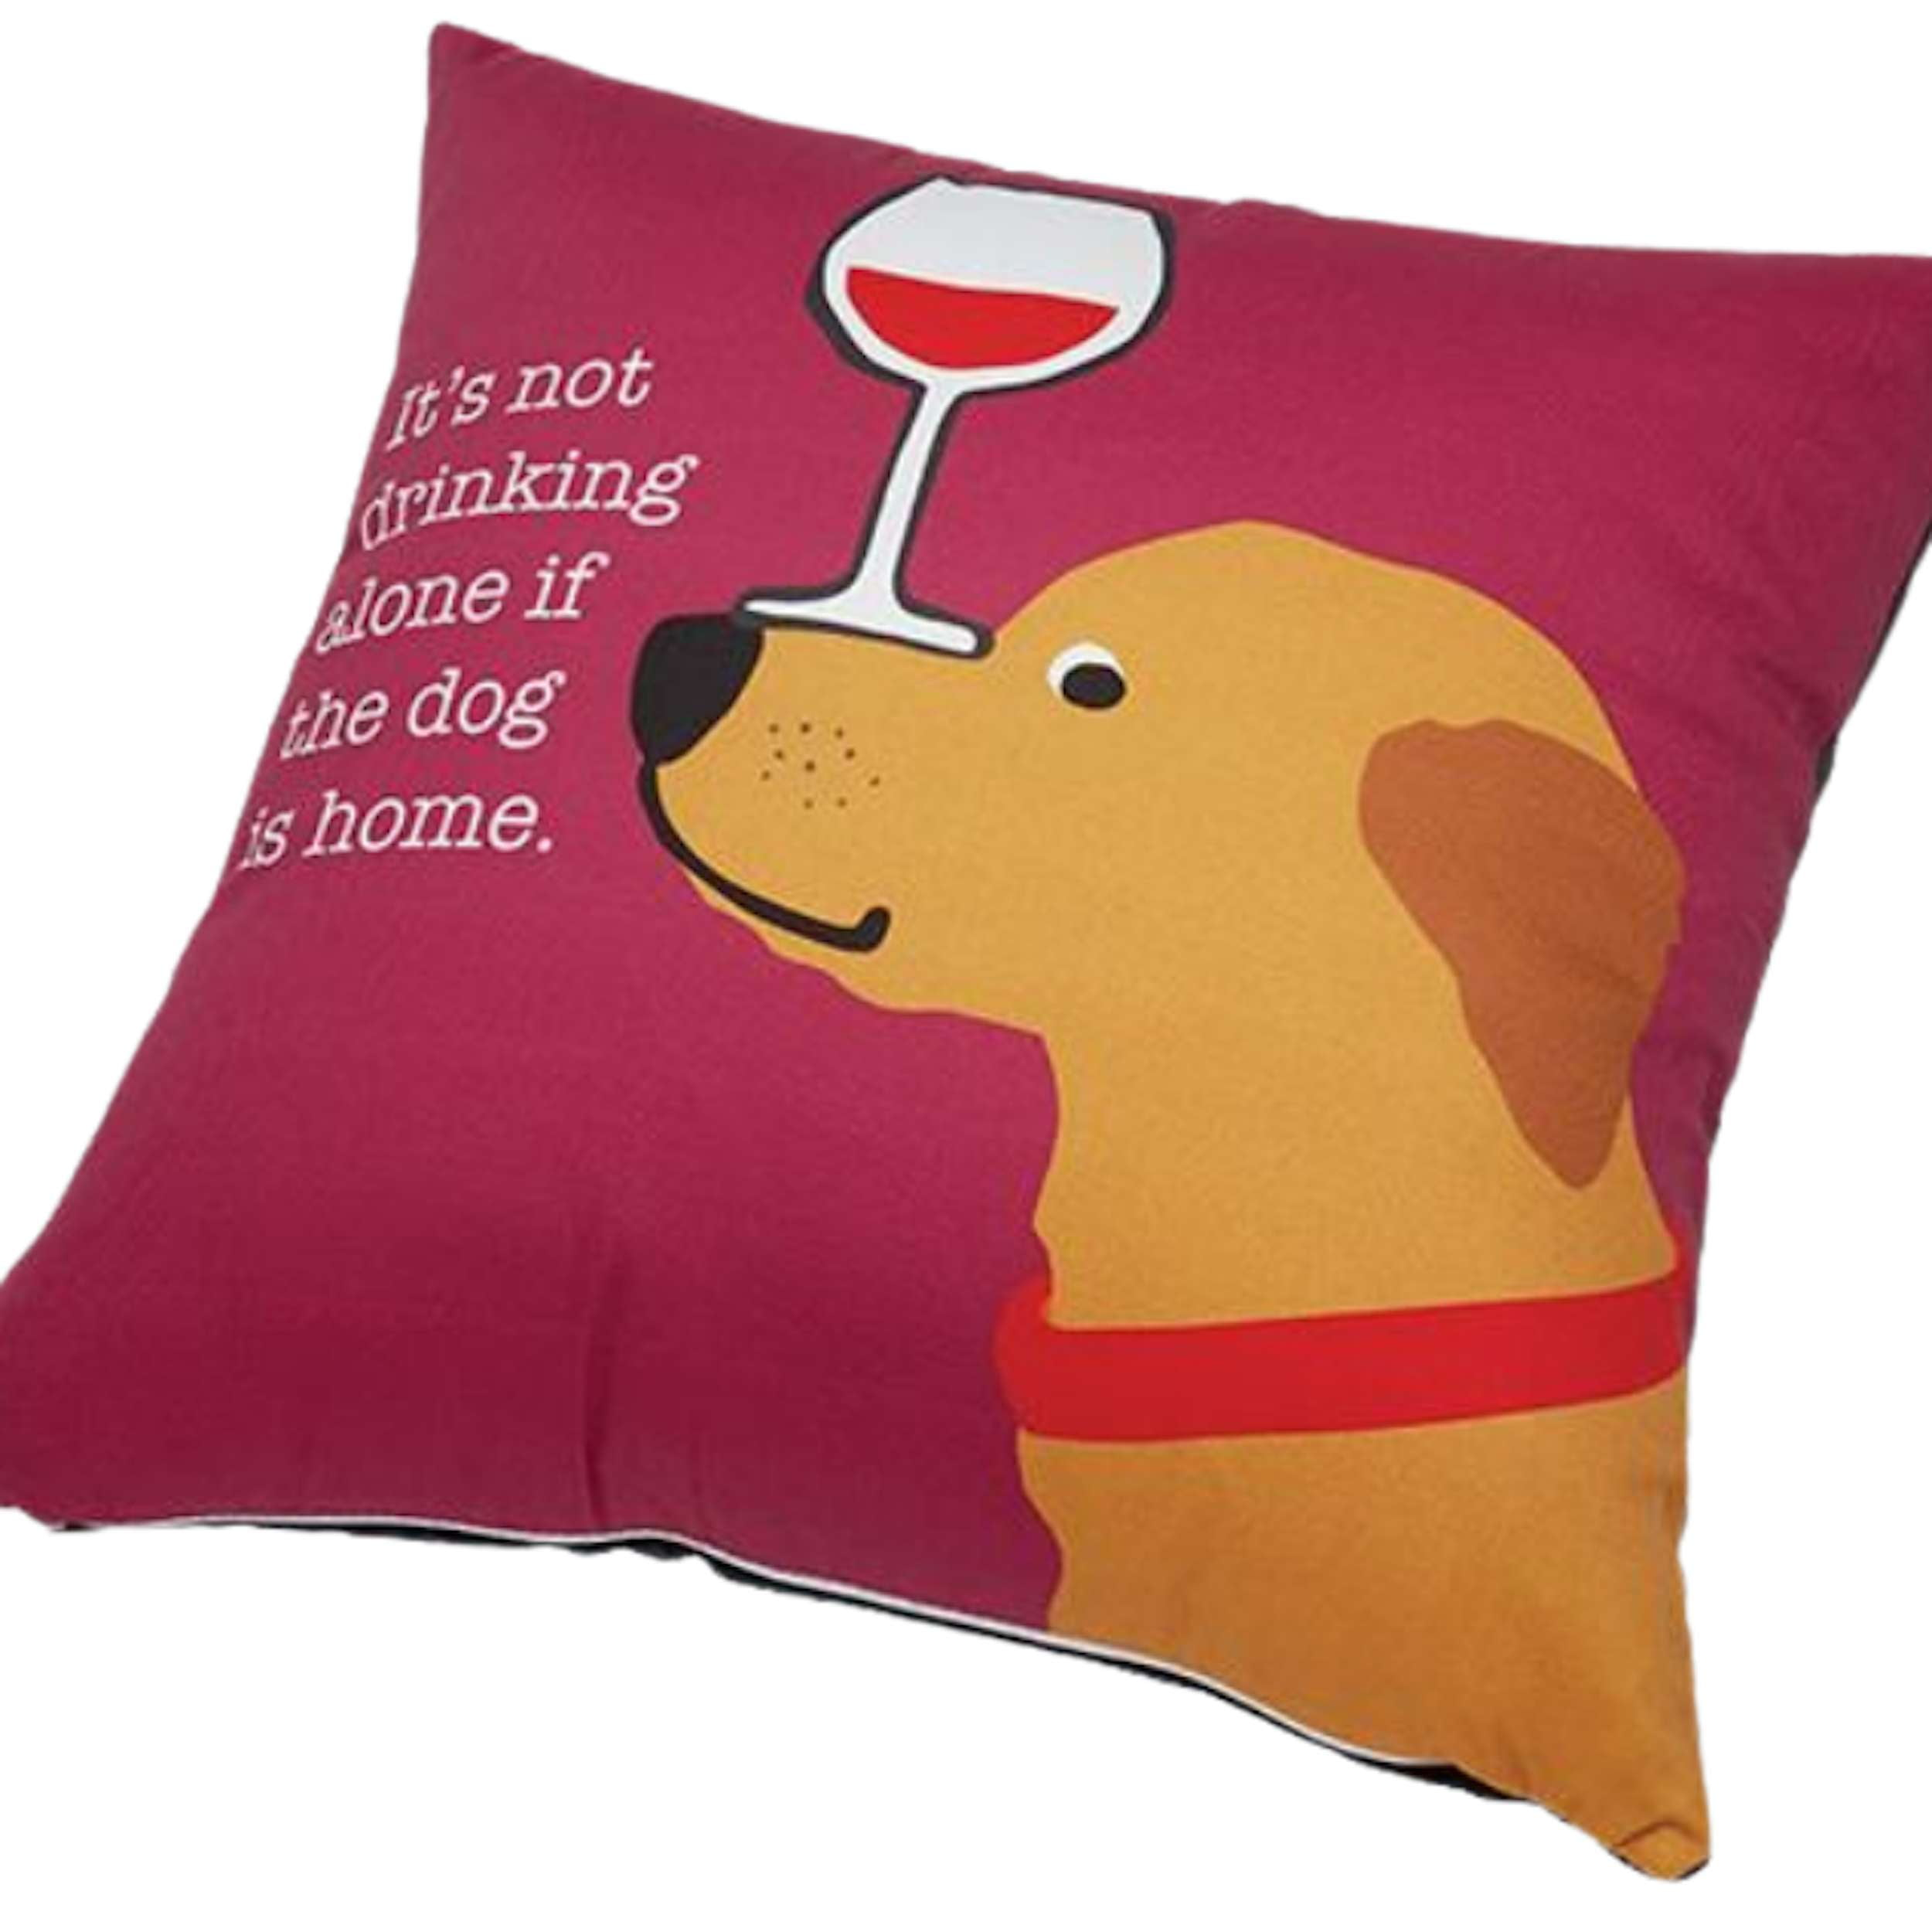 THROW-PILLOW-ITS-NOT-DRINKING-ALONE-IF-THE-DOG-IS-HOME-DOG-PUPPY